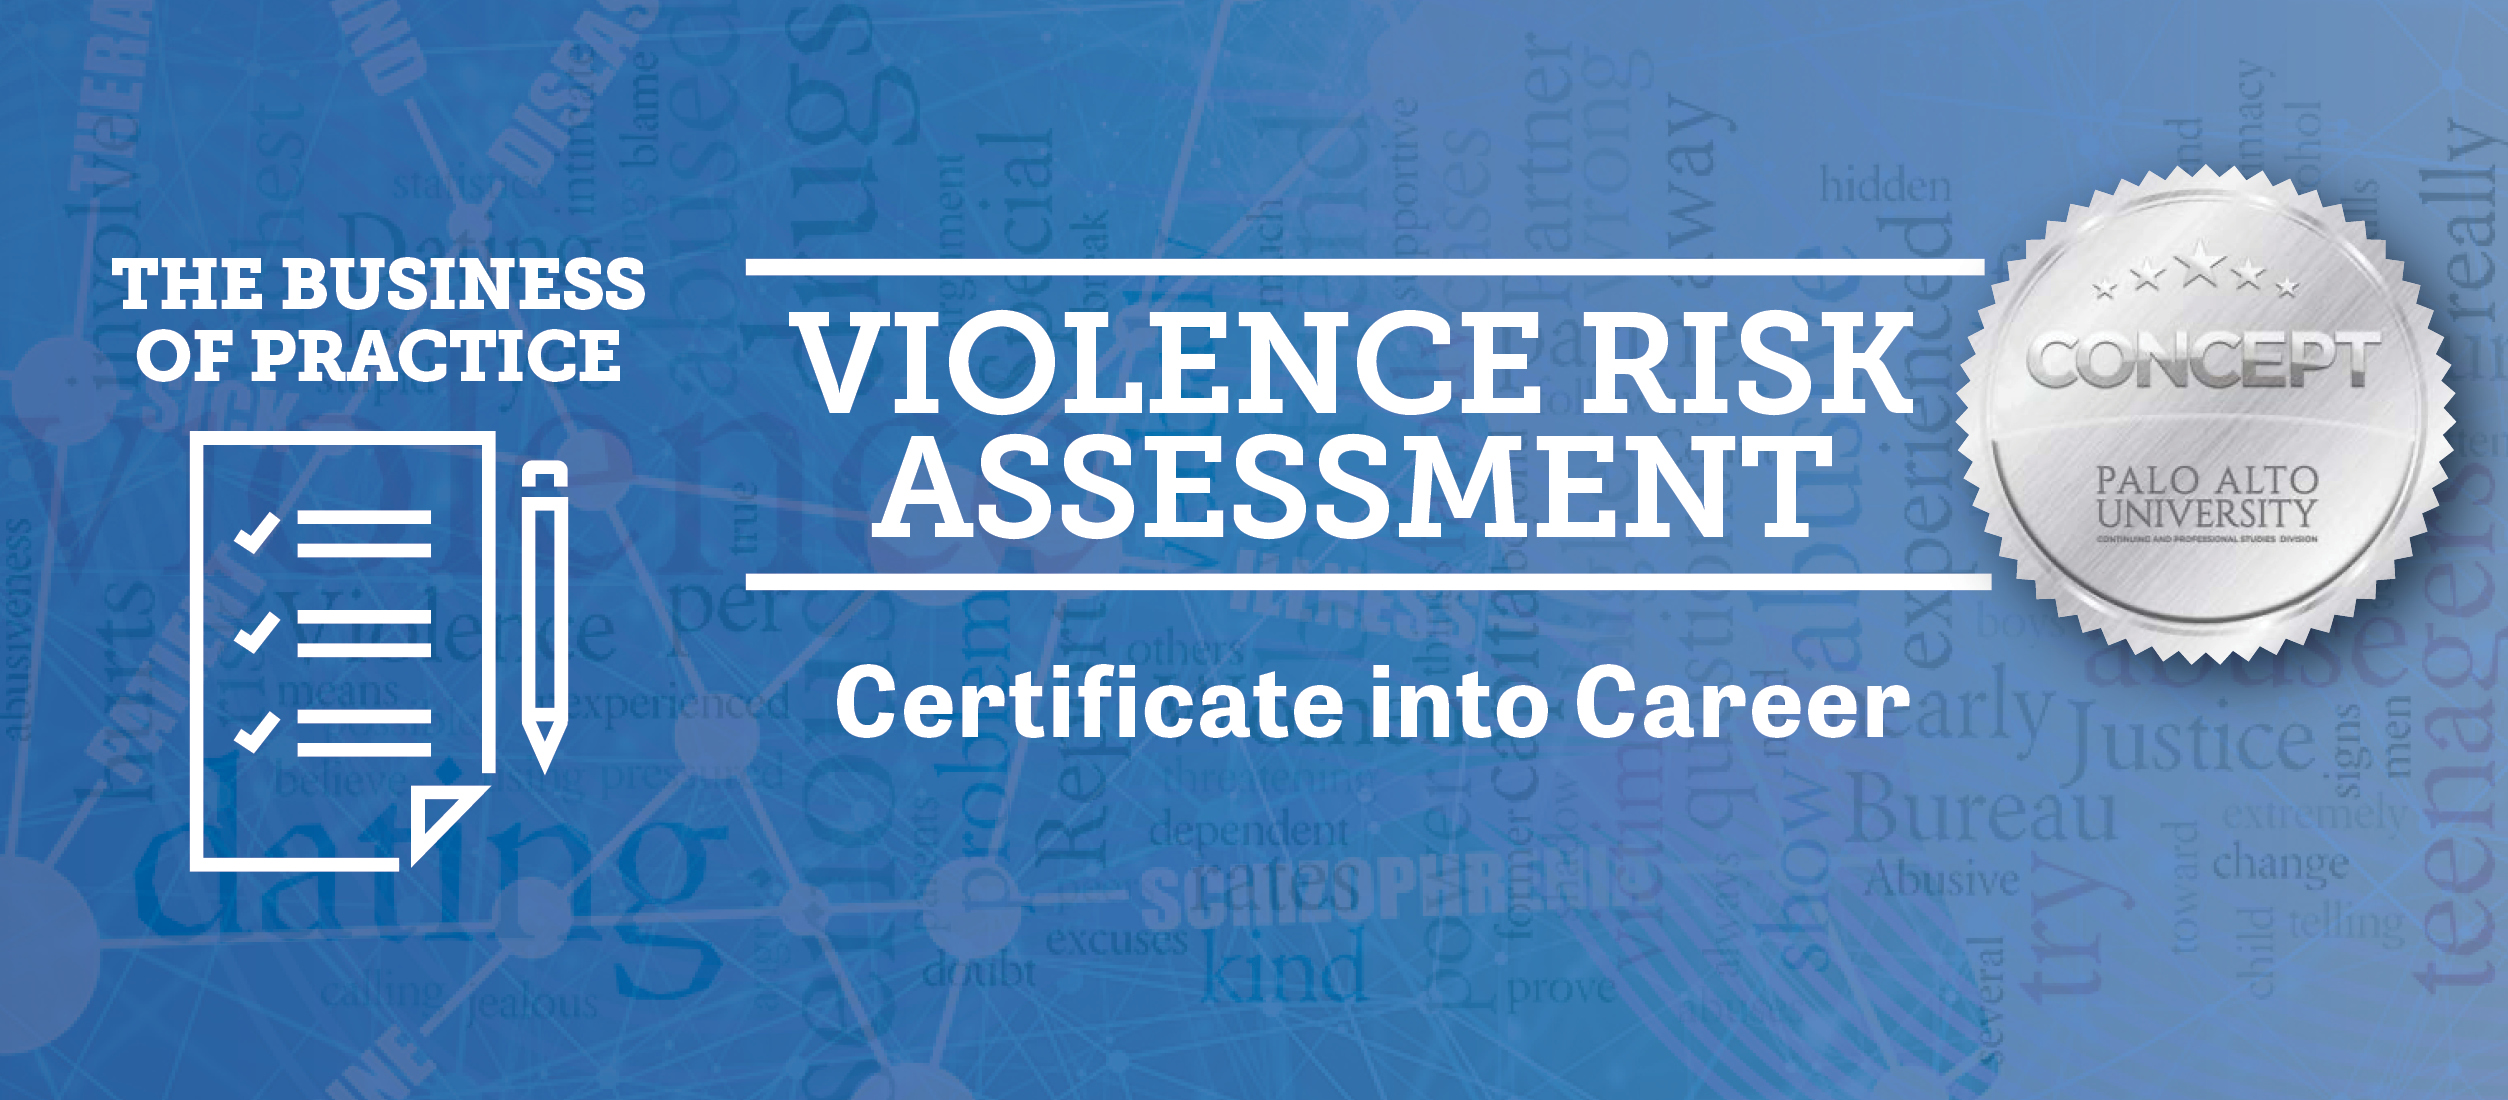 Violence Risk Assessment - From Certificate to Career